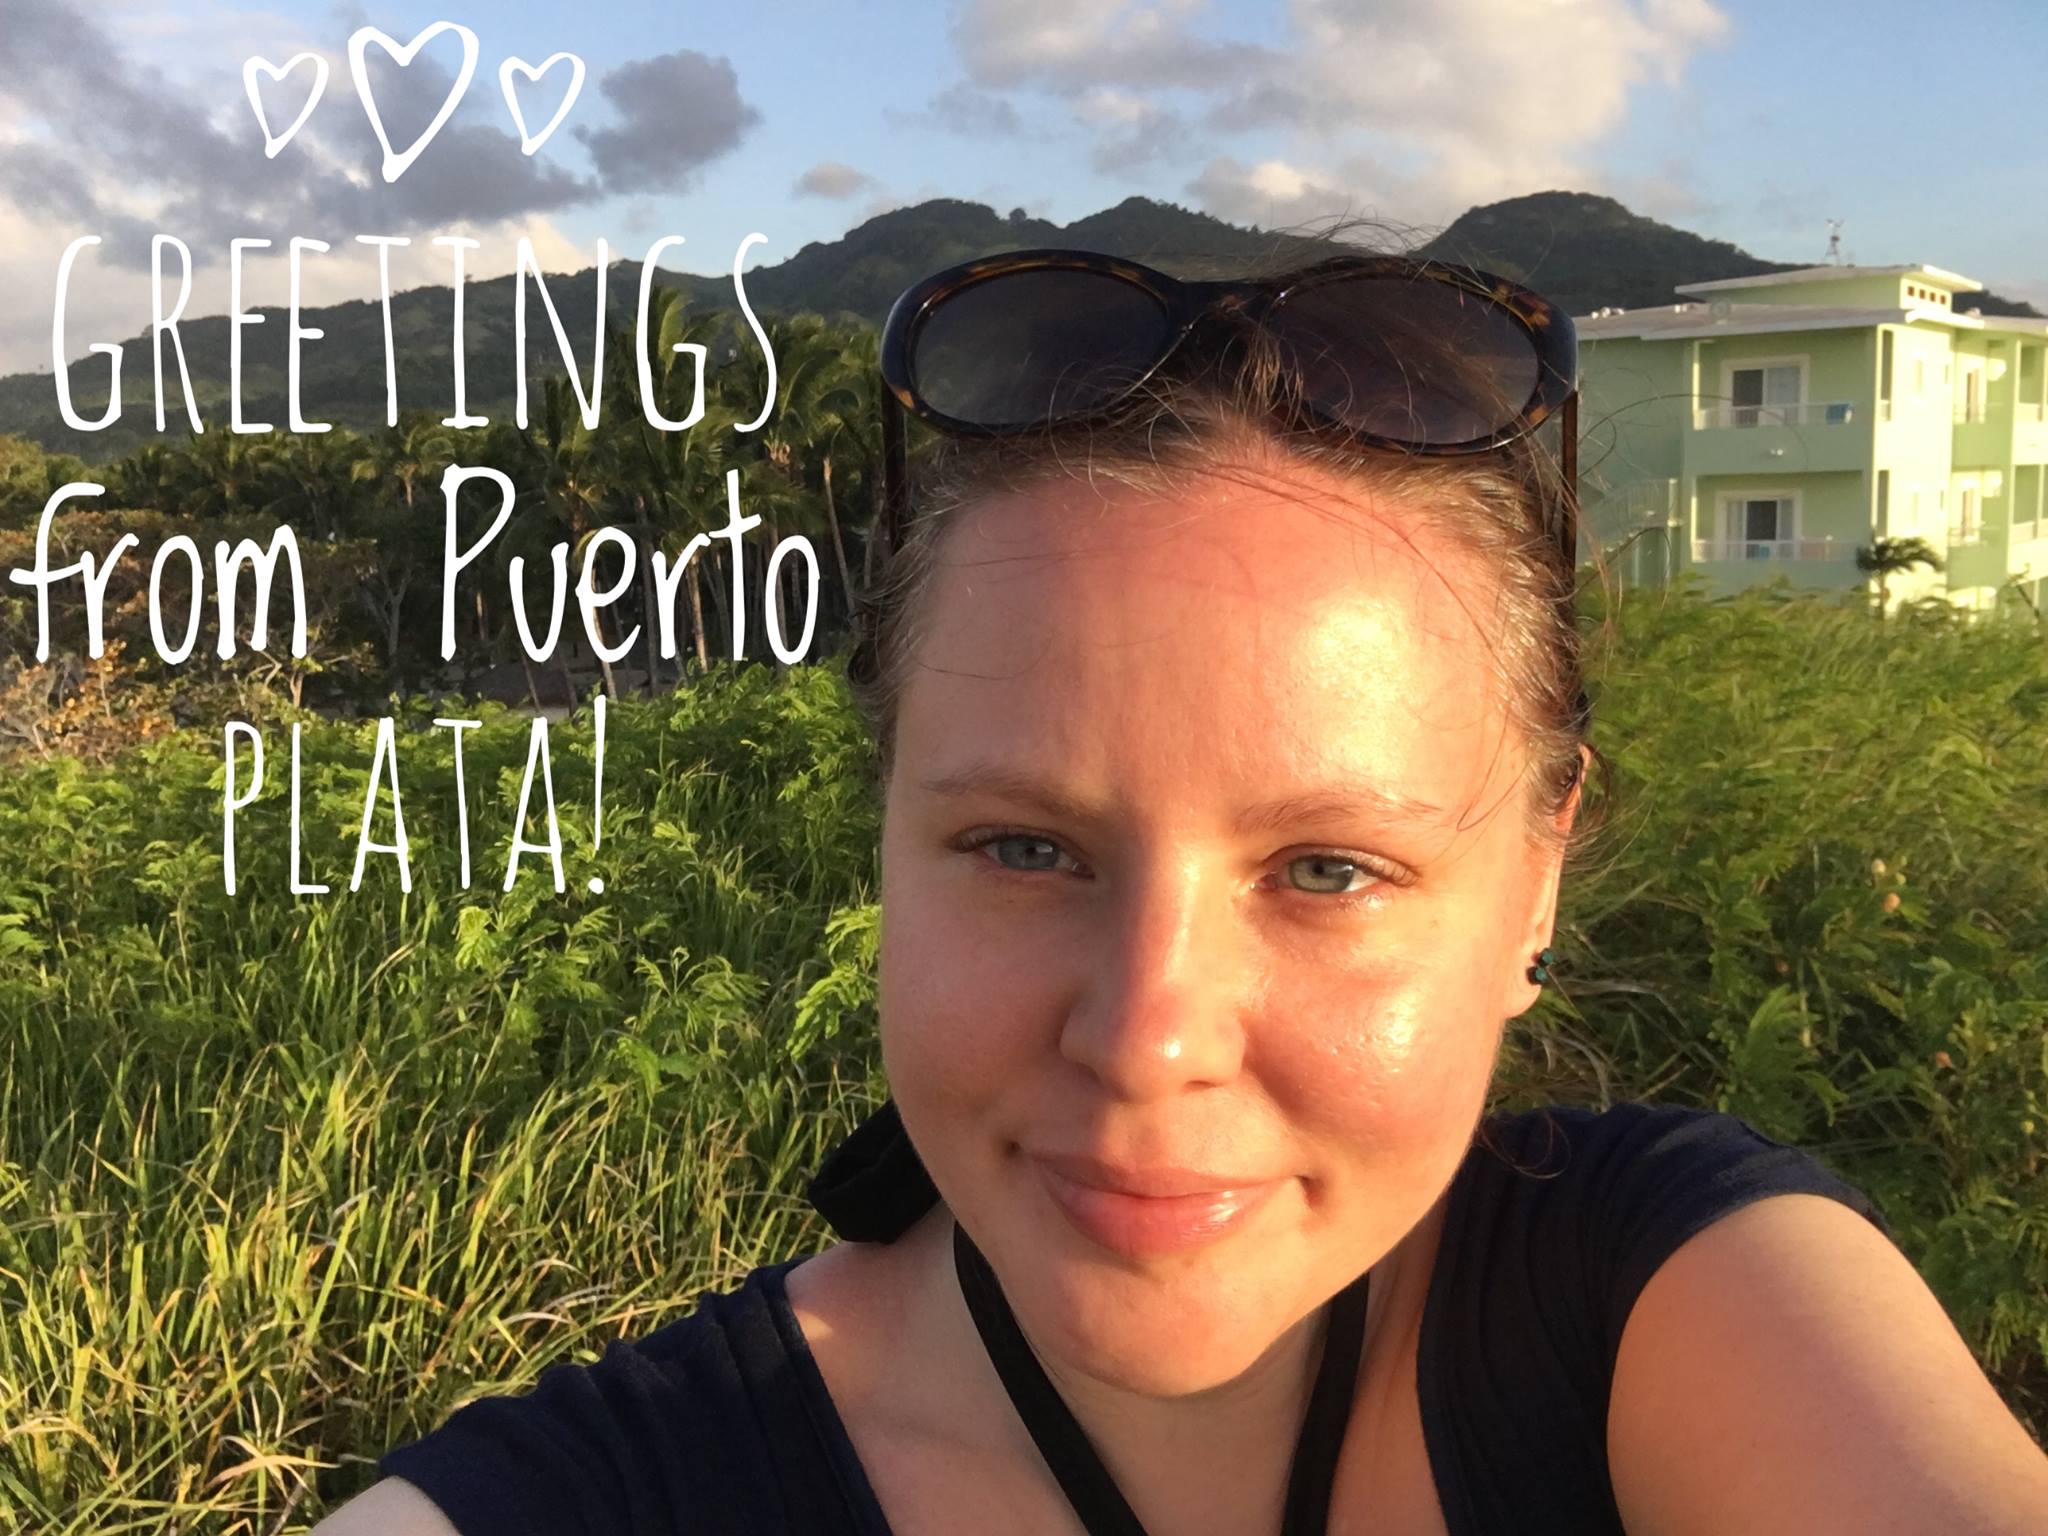 Greetings from Puerto Plata!